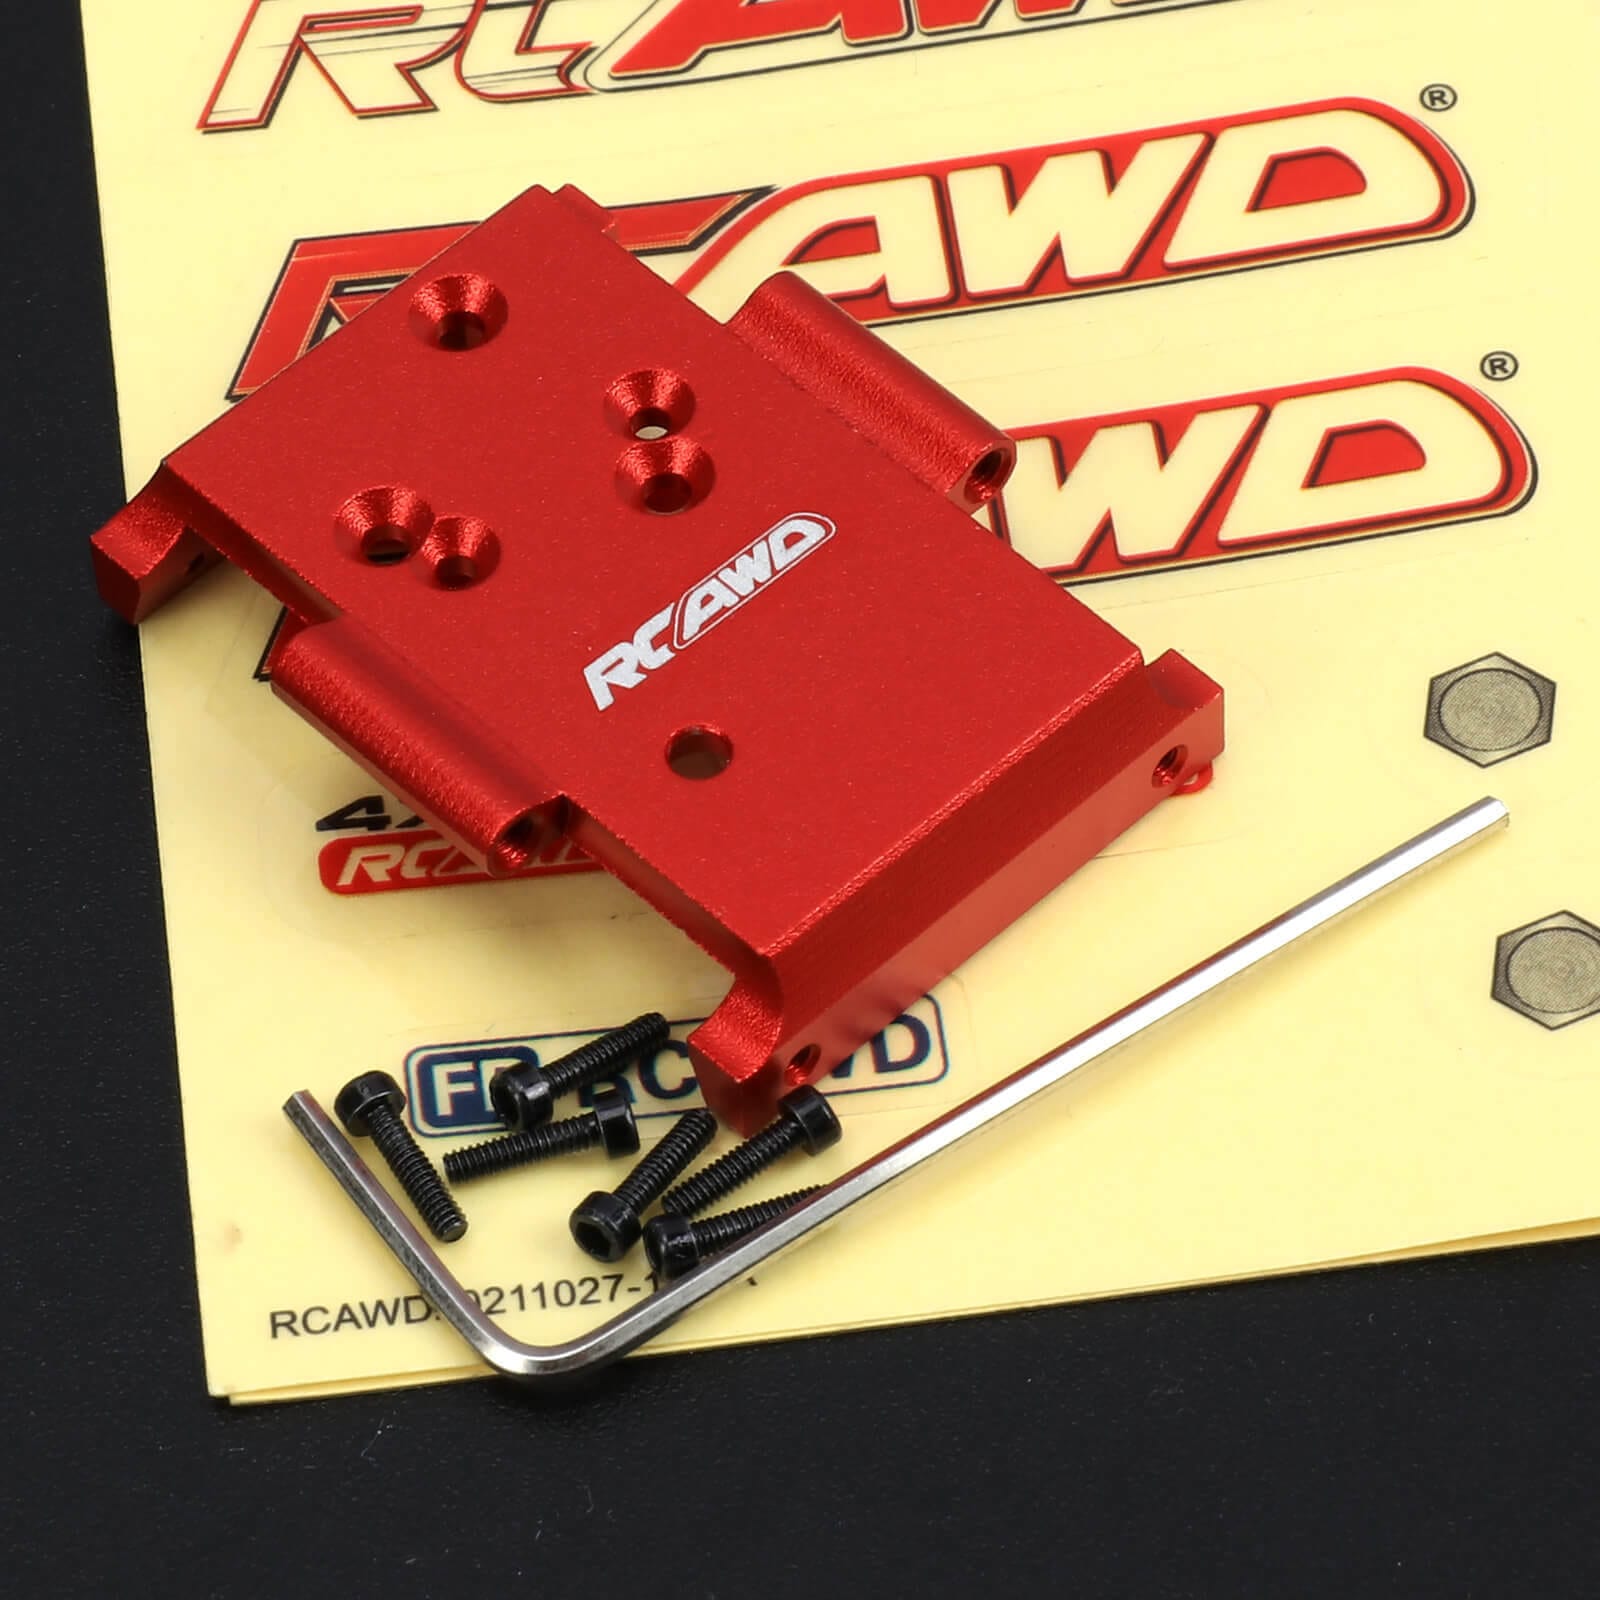 RCAWD RC CRAWLER UPGRADE PARTS RCAWD Hobby Plus 1/18 CR18P Metal Gearbox Combo Transmission Mount Plate Upgrade Parts 240302